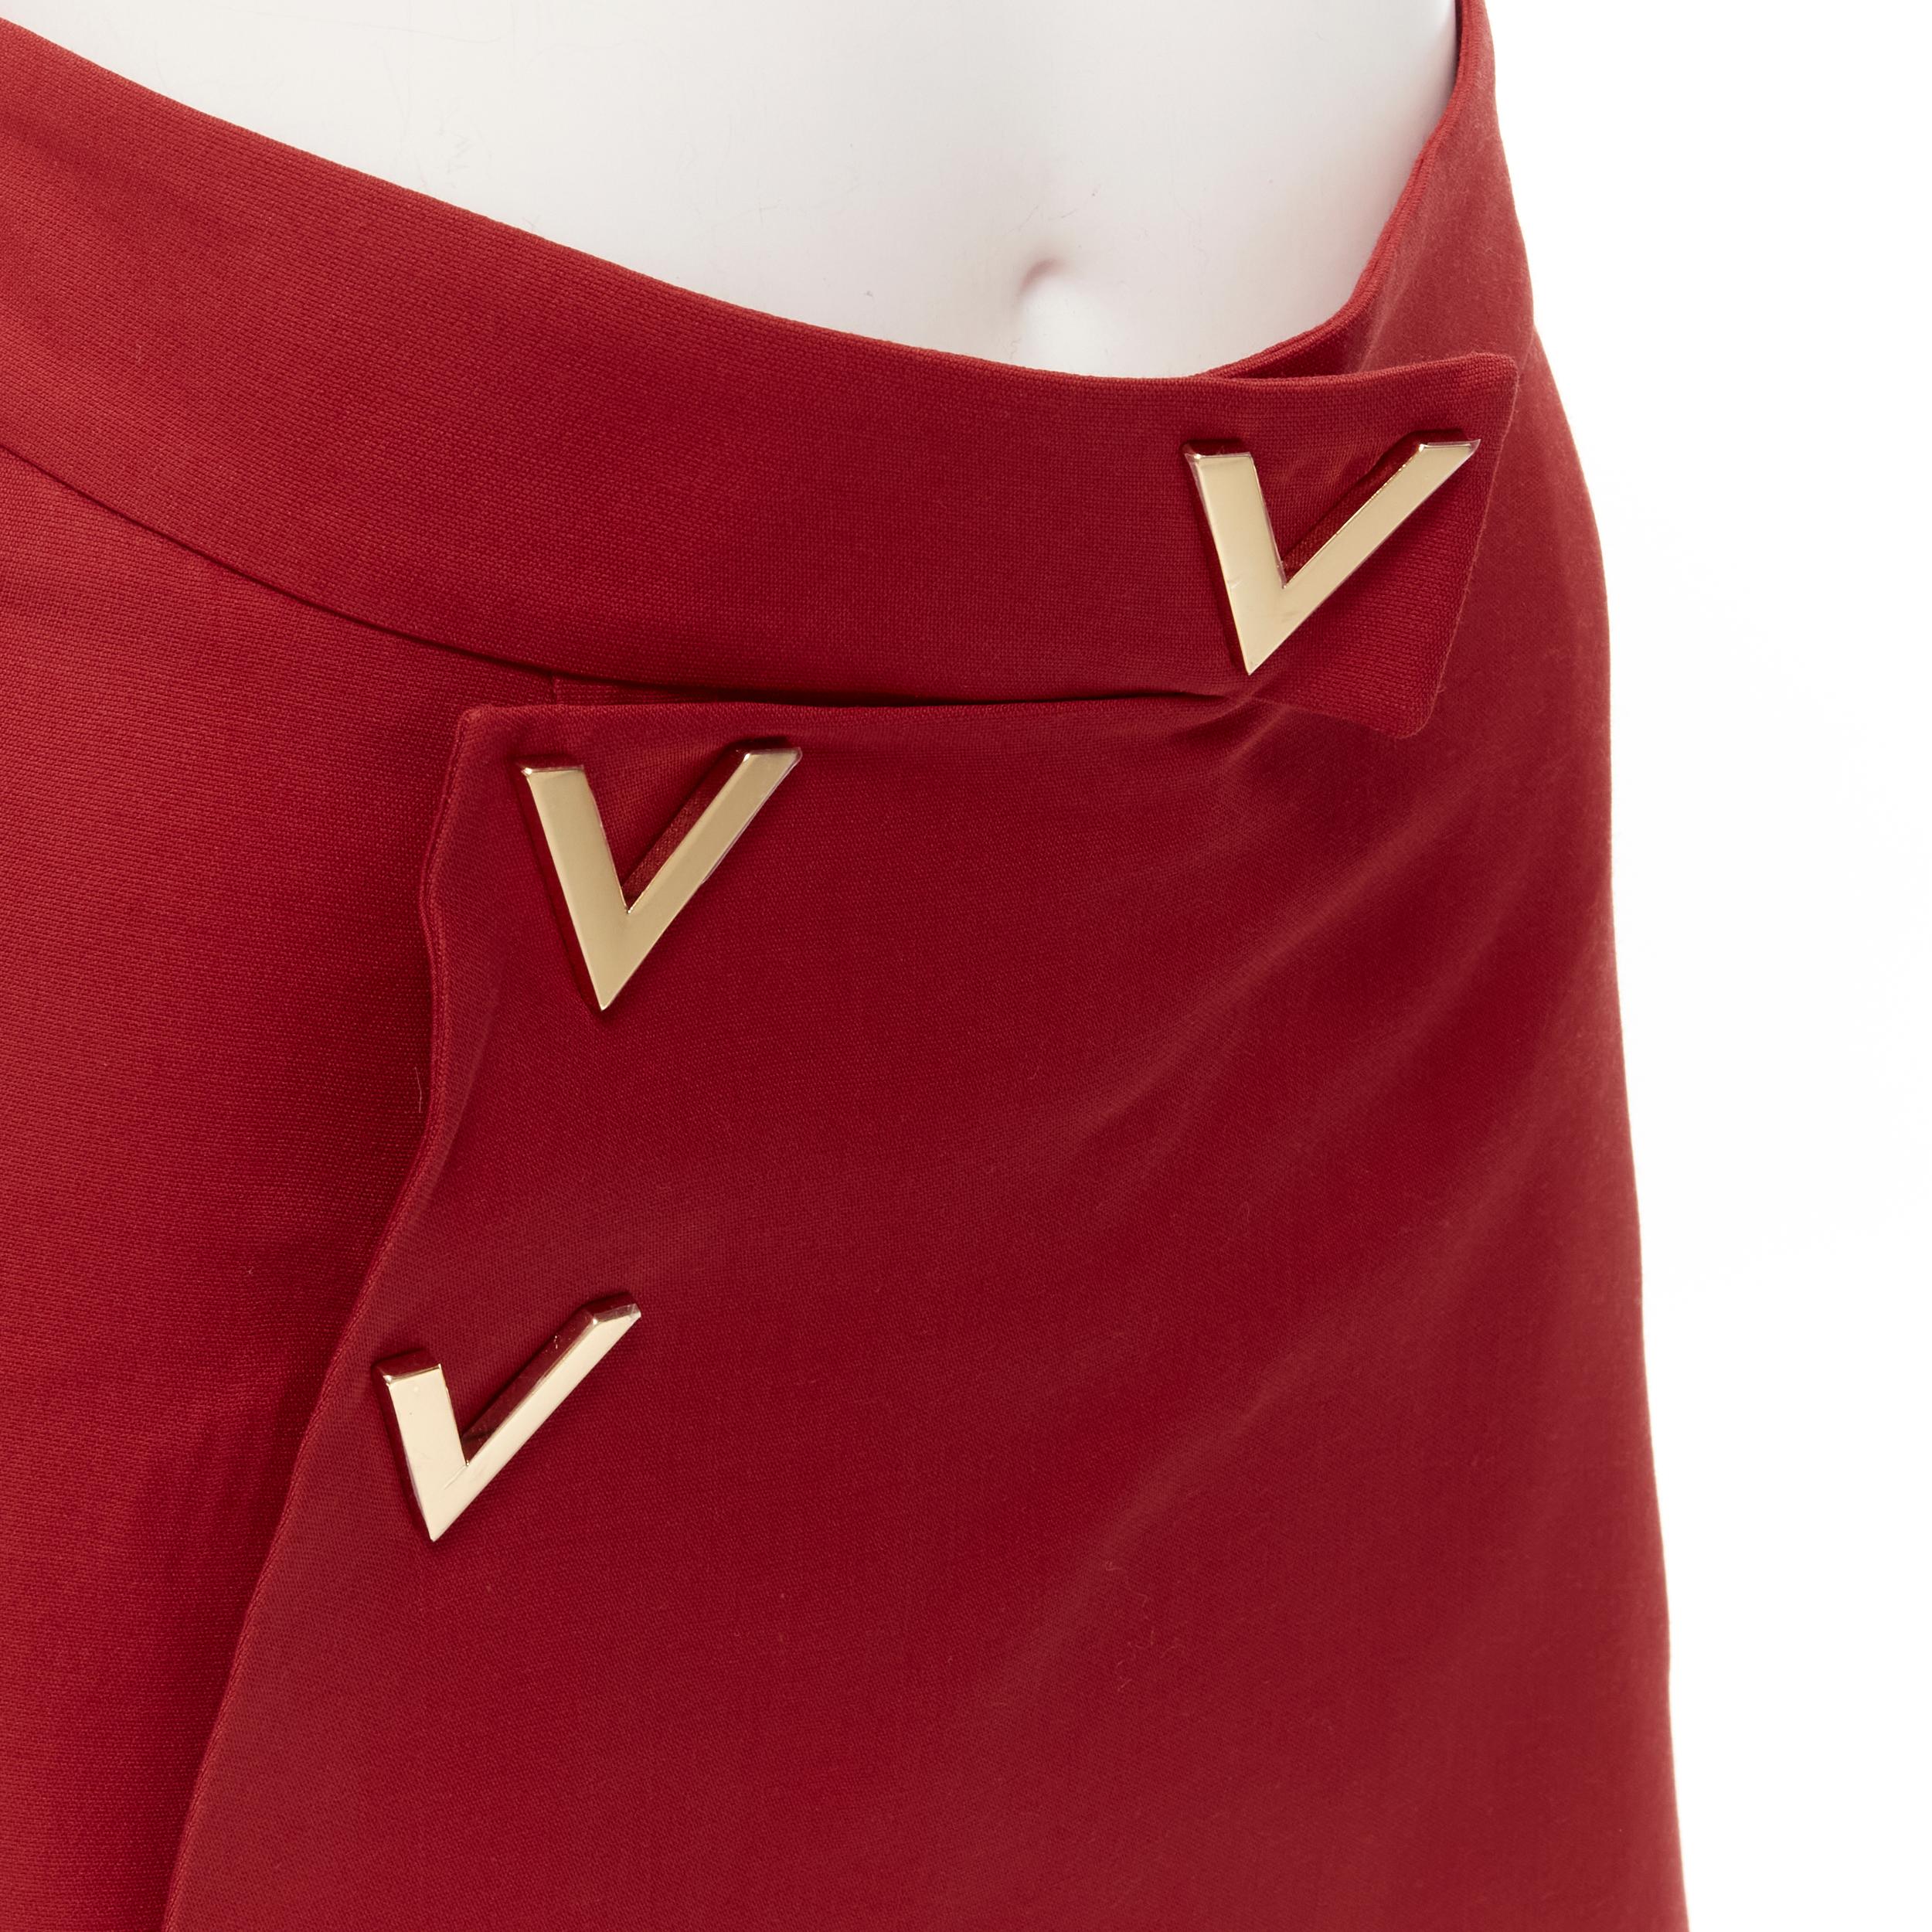 VALENTINO VLOGO gold tone V button red wool silk 60's mini skirt skorts IT38 XS

Reference: AAWC/A00382

Brand: Valentino

Designer: Pier Paolo Piccioli

Material: Wool, Silk

Color: Red, Gold

Pattern: Solid

Closure: Button Fly

Lining: Silk

Made